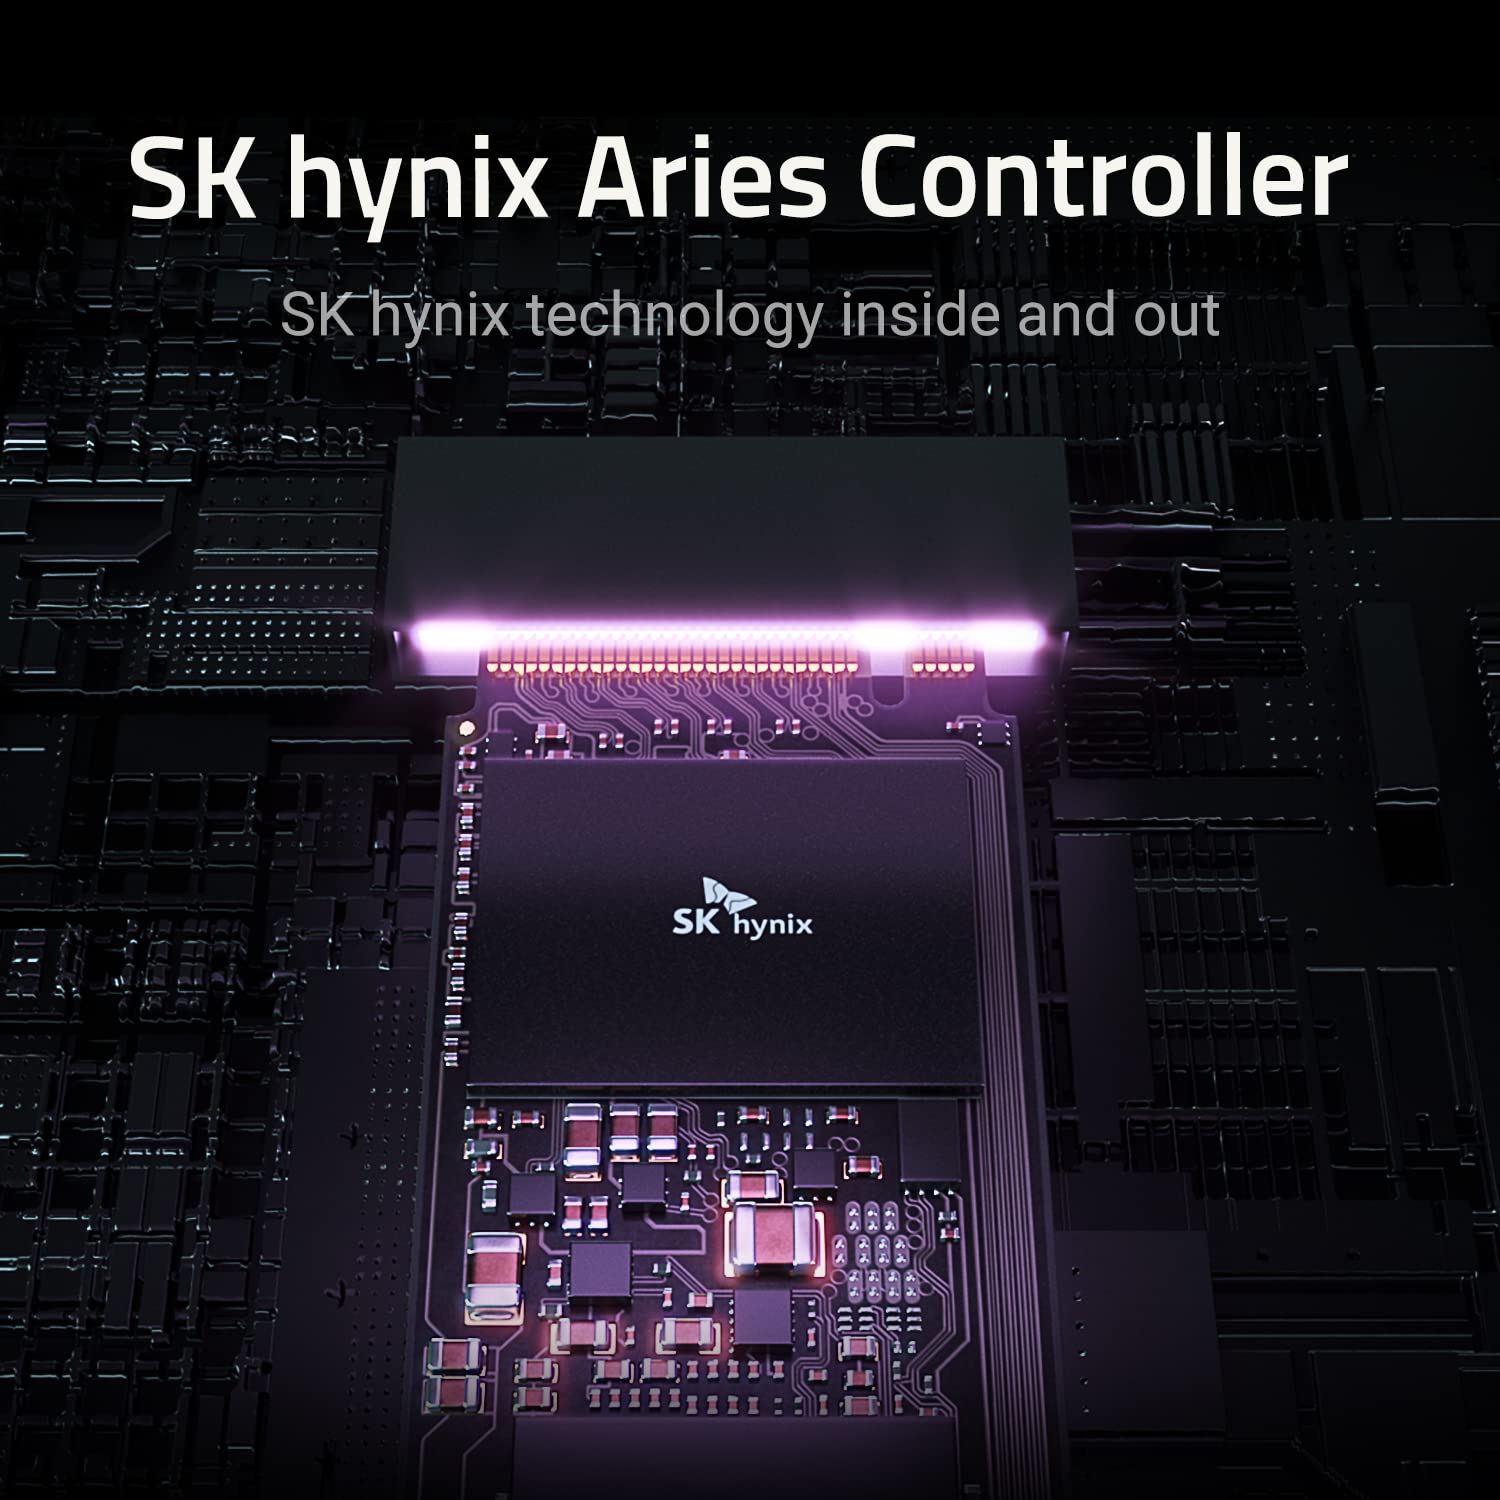 SK hynix Platinum P41 1TB PCIe NVMe Gen4 M.2 2280 Internal Gaming SSD, Up to 7,000MB/S, Compact M.2 SSD Form Factor SSD - Internal Solid State Drive with 176-Layer NAND Flash